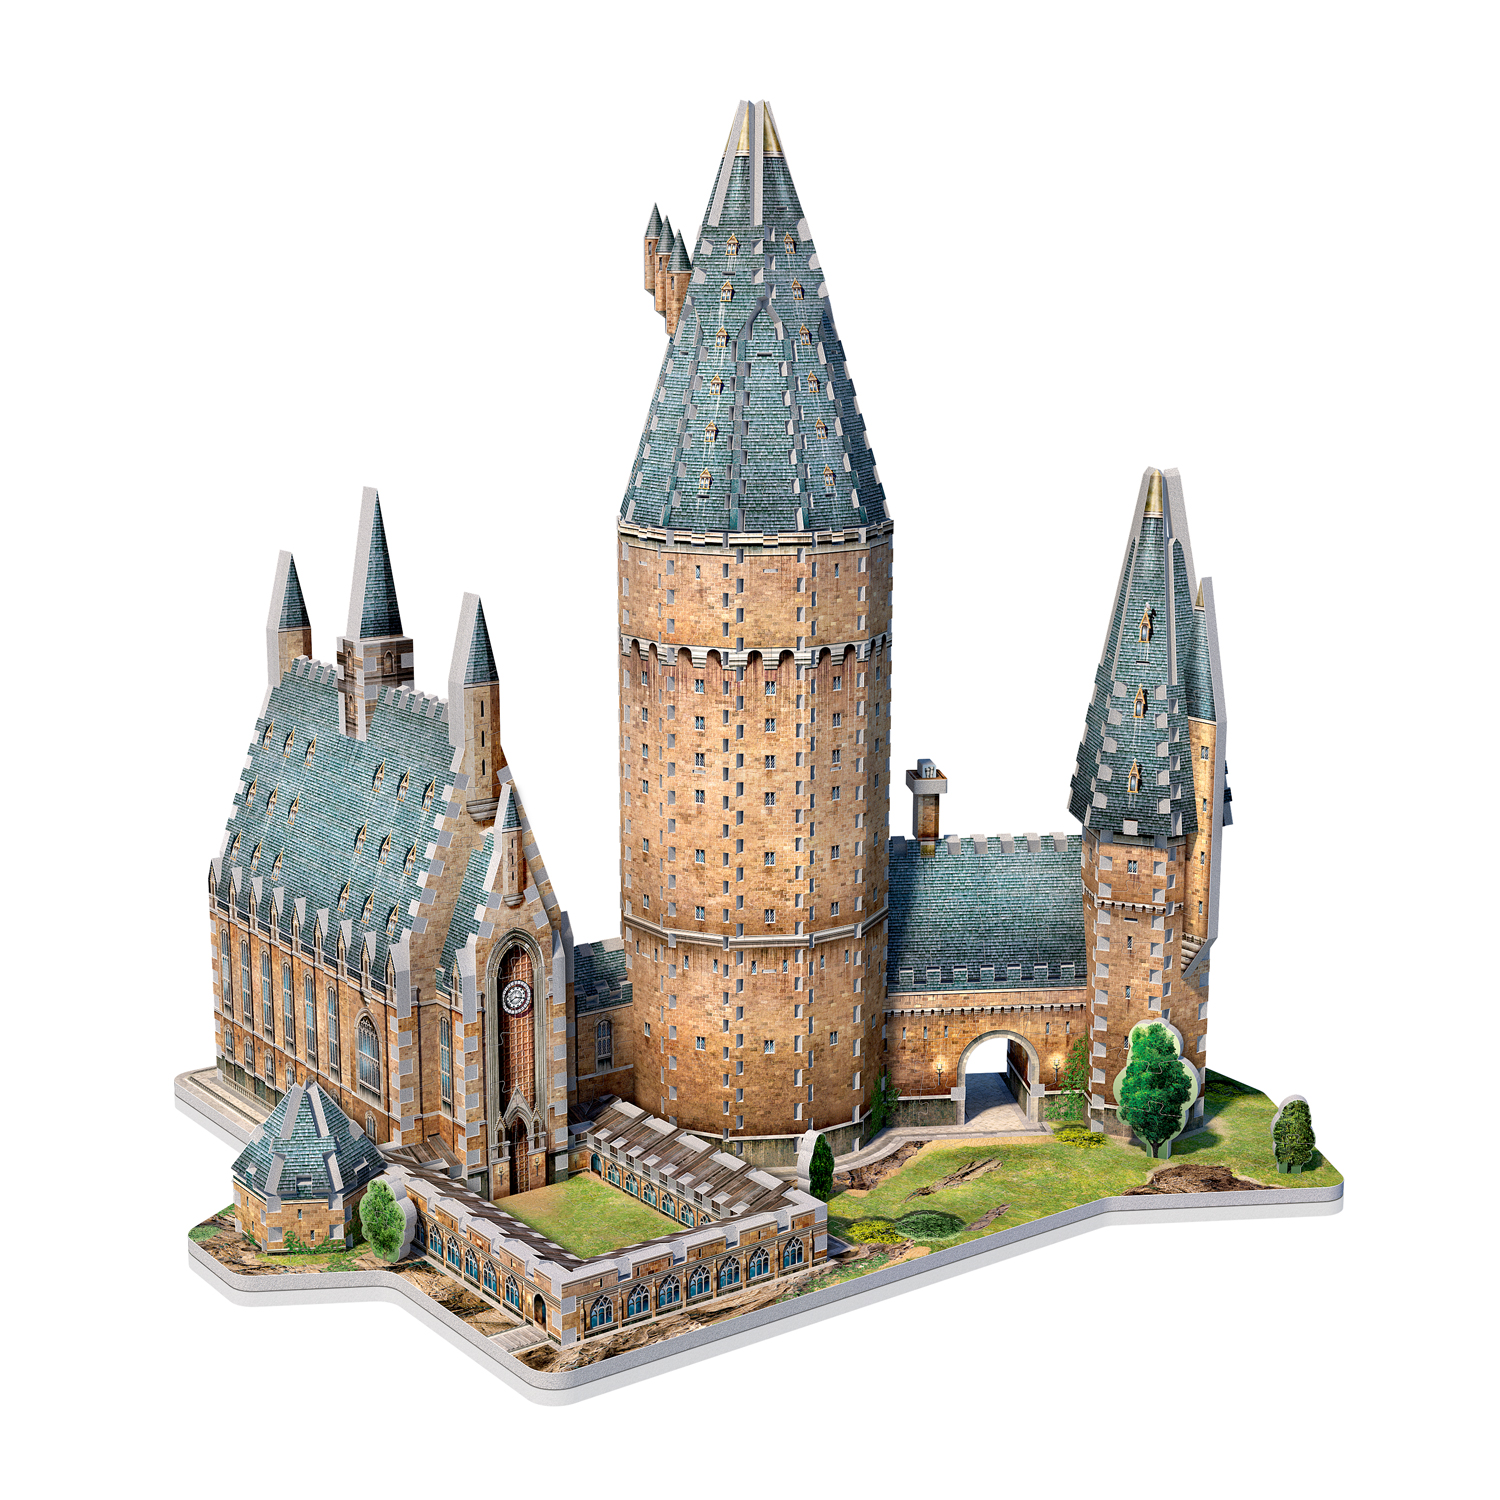 Harry Potter Hogwarts Castle 3-D Puzzles The Great Hall 